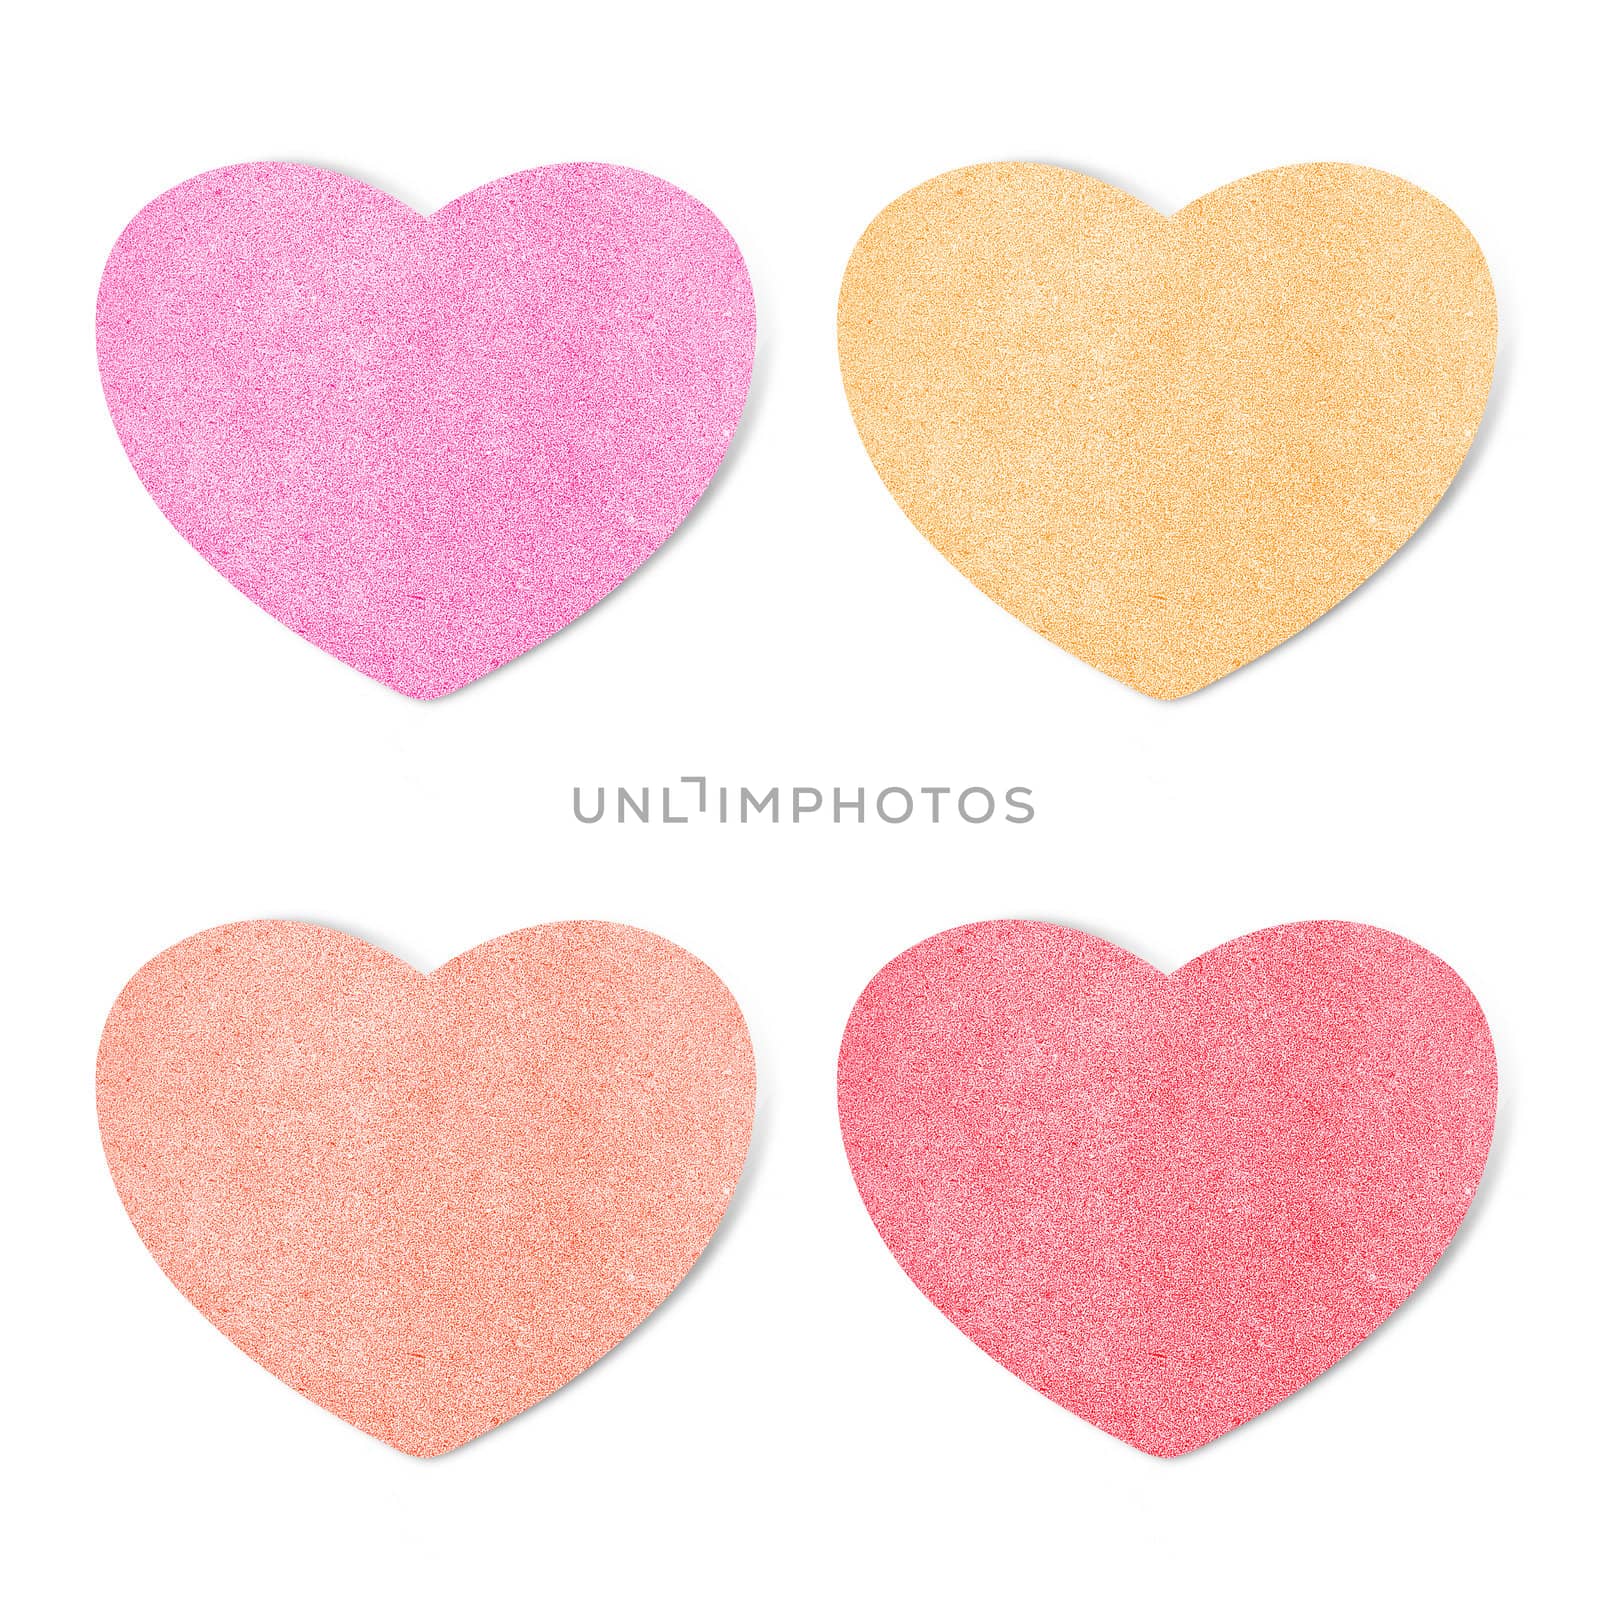 Paper texture ,heart on white background